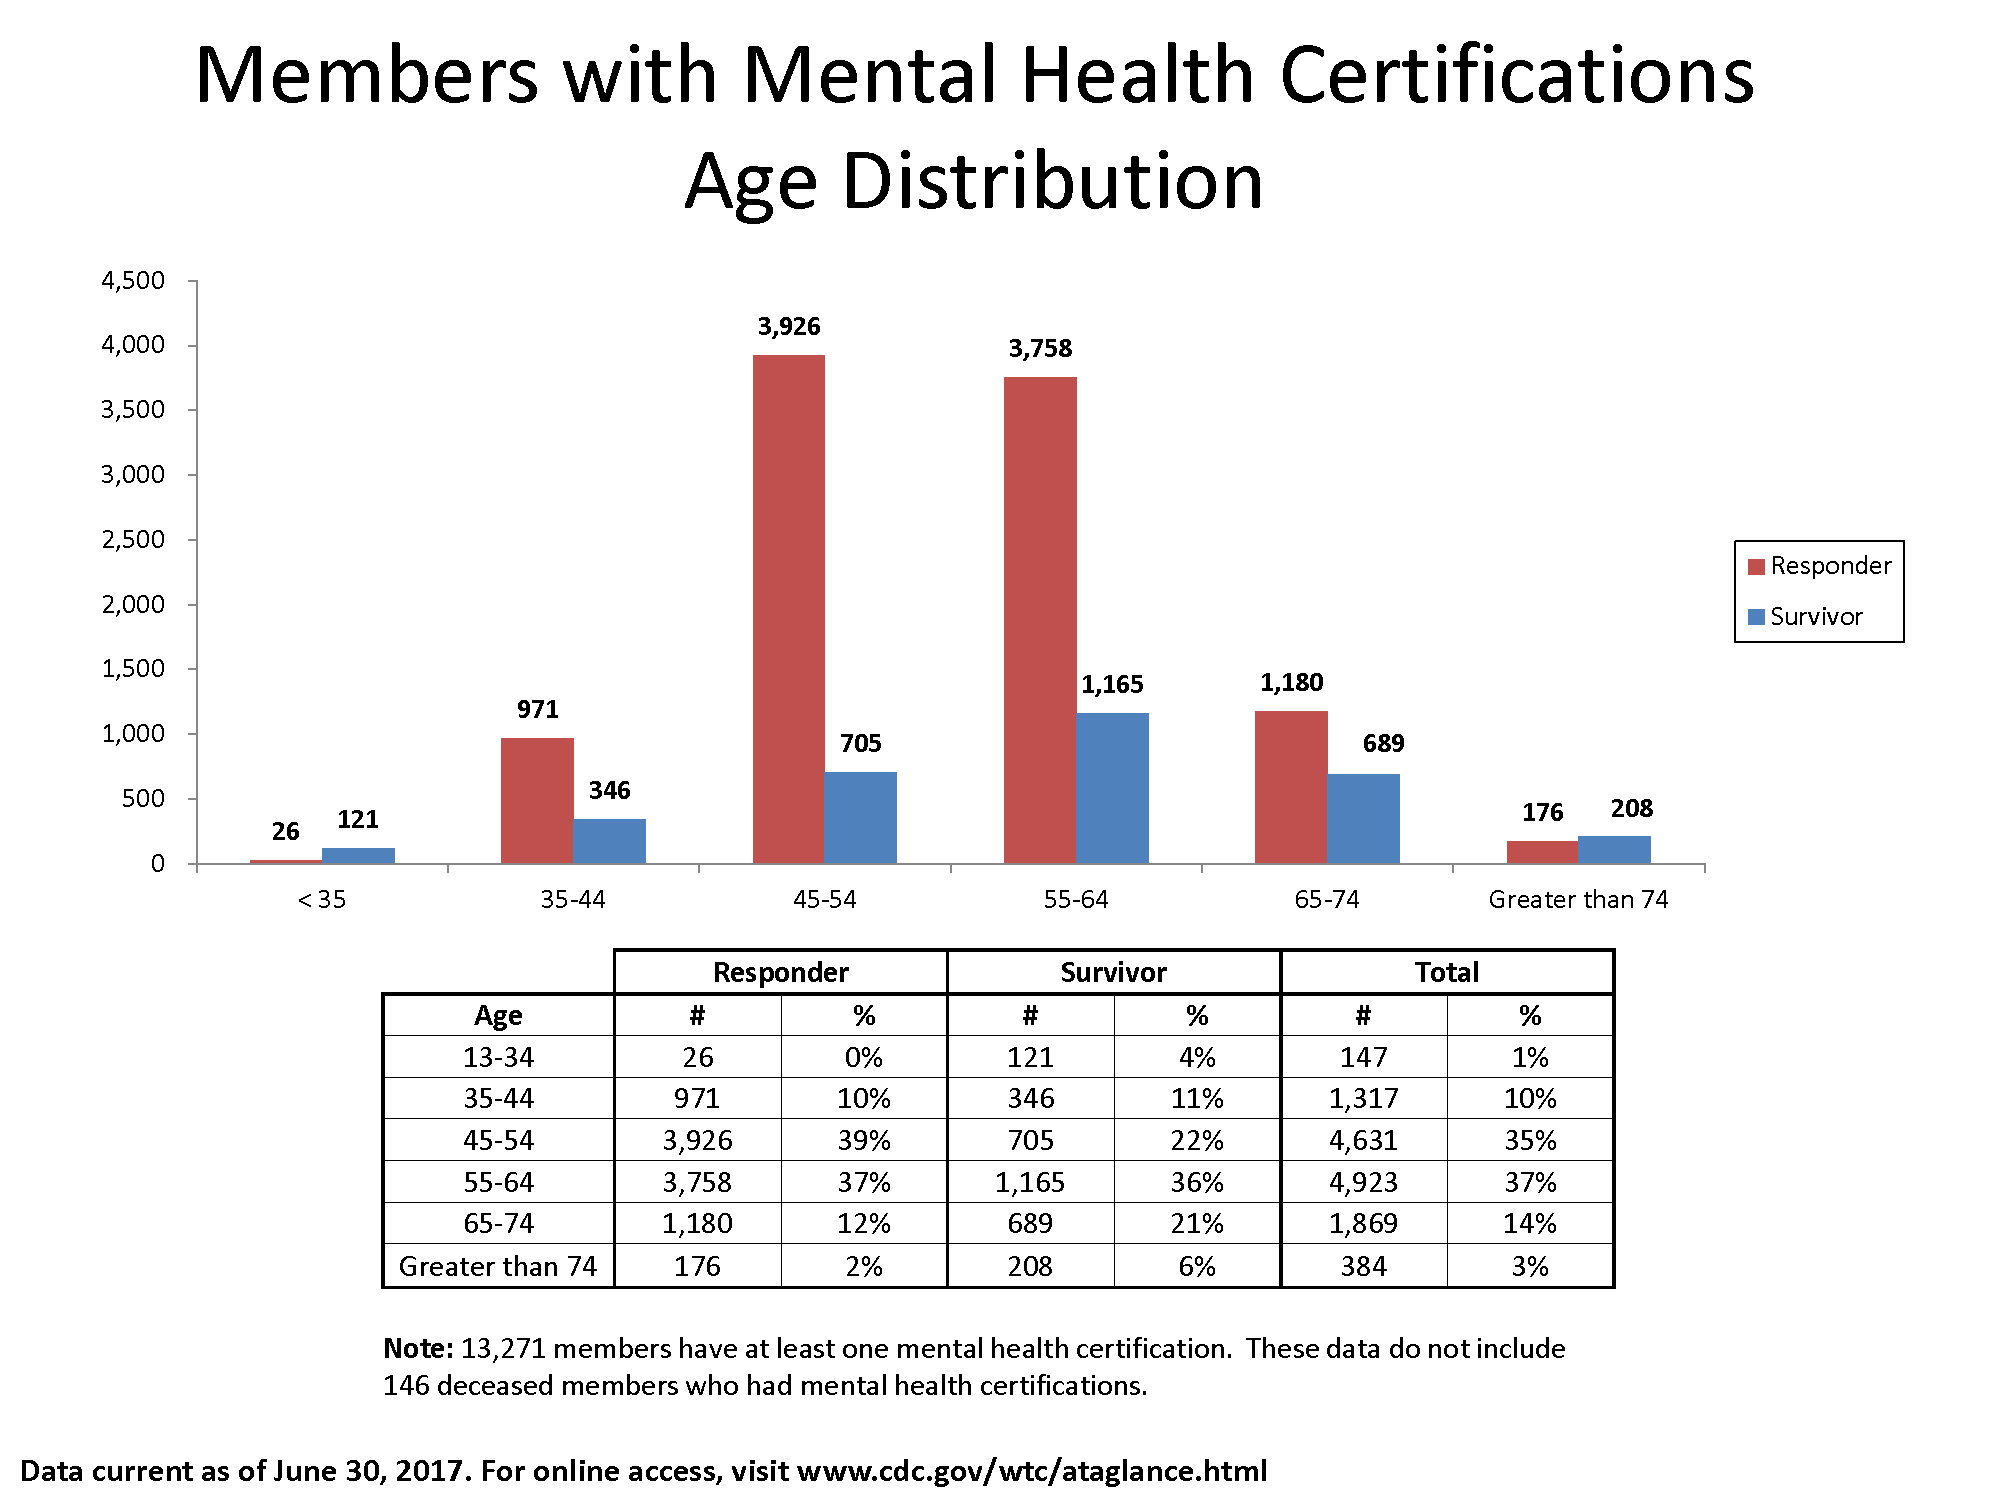 Bar chart of data in the table showing the number of members with mental health certifications by Responder and Survivor and age bracket.